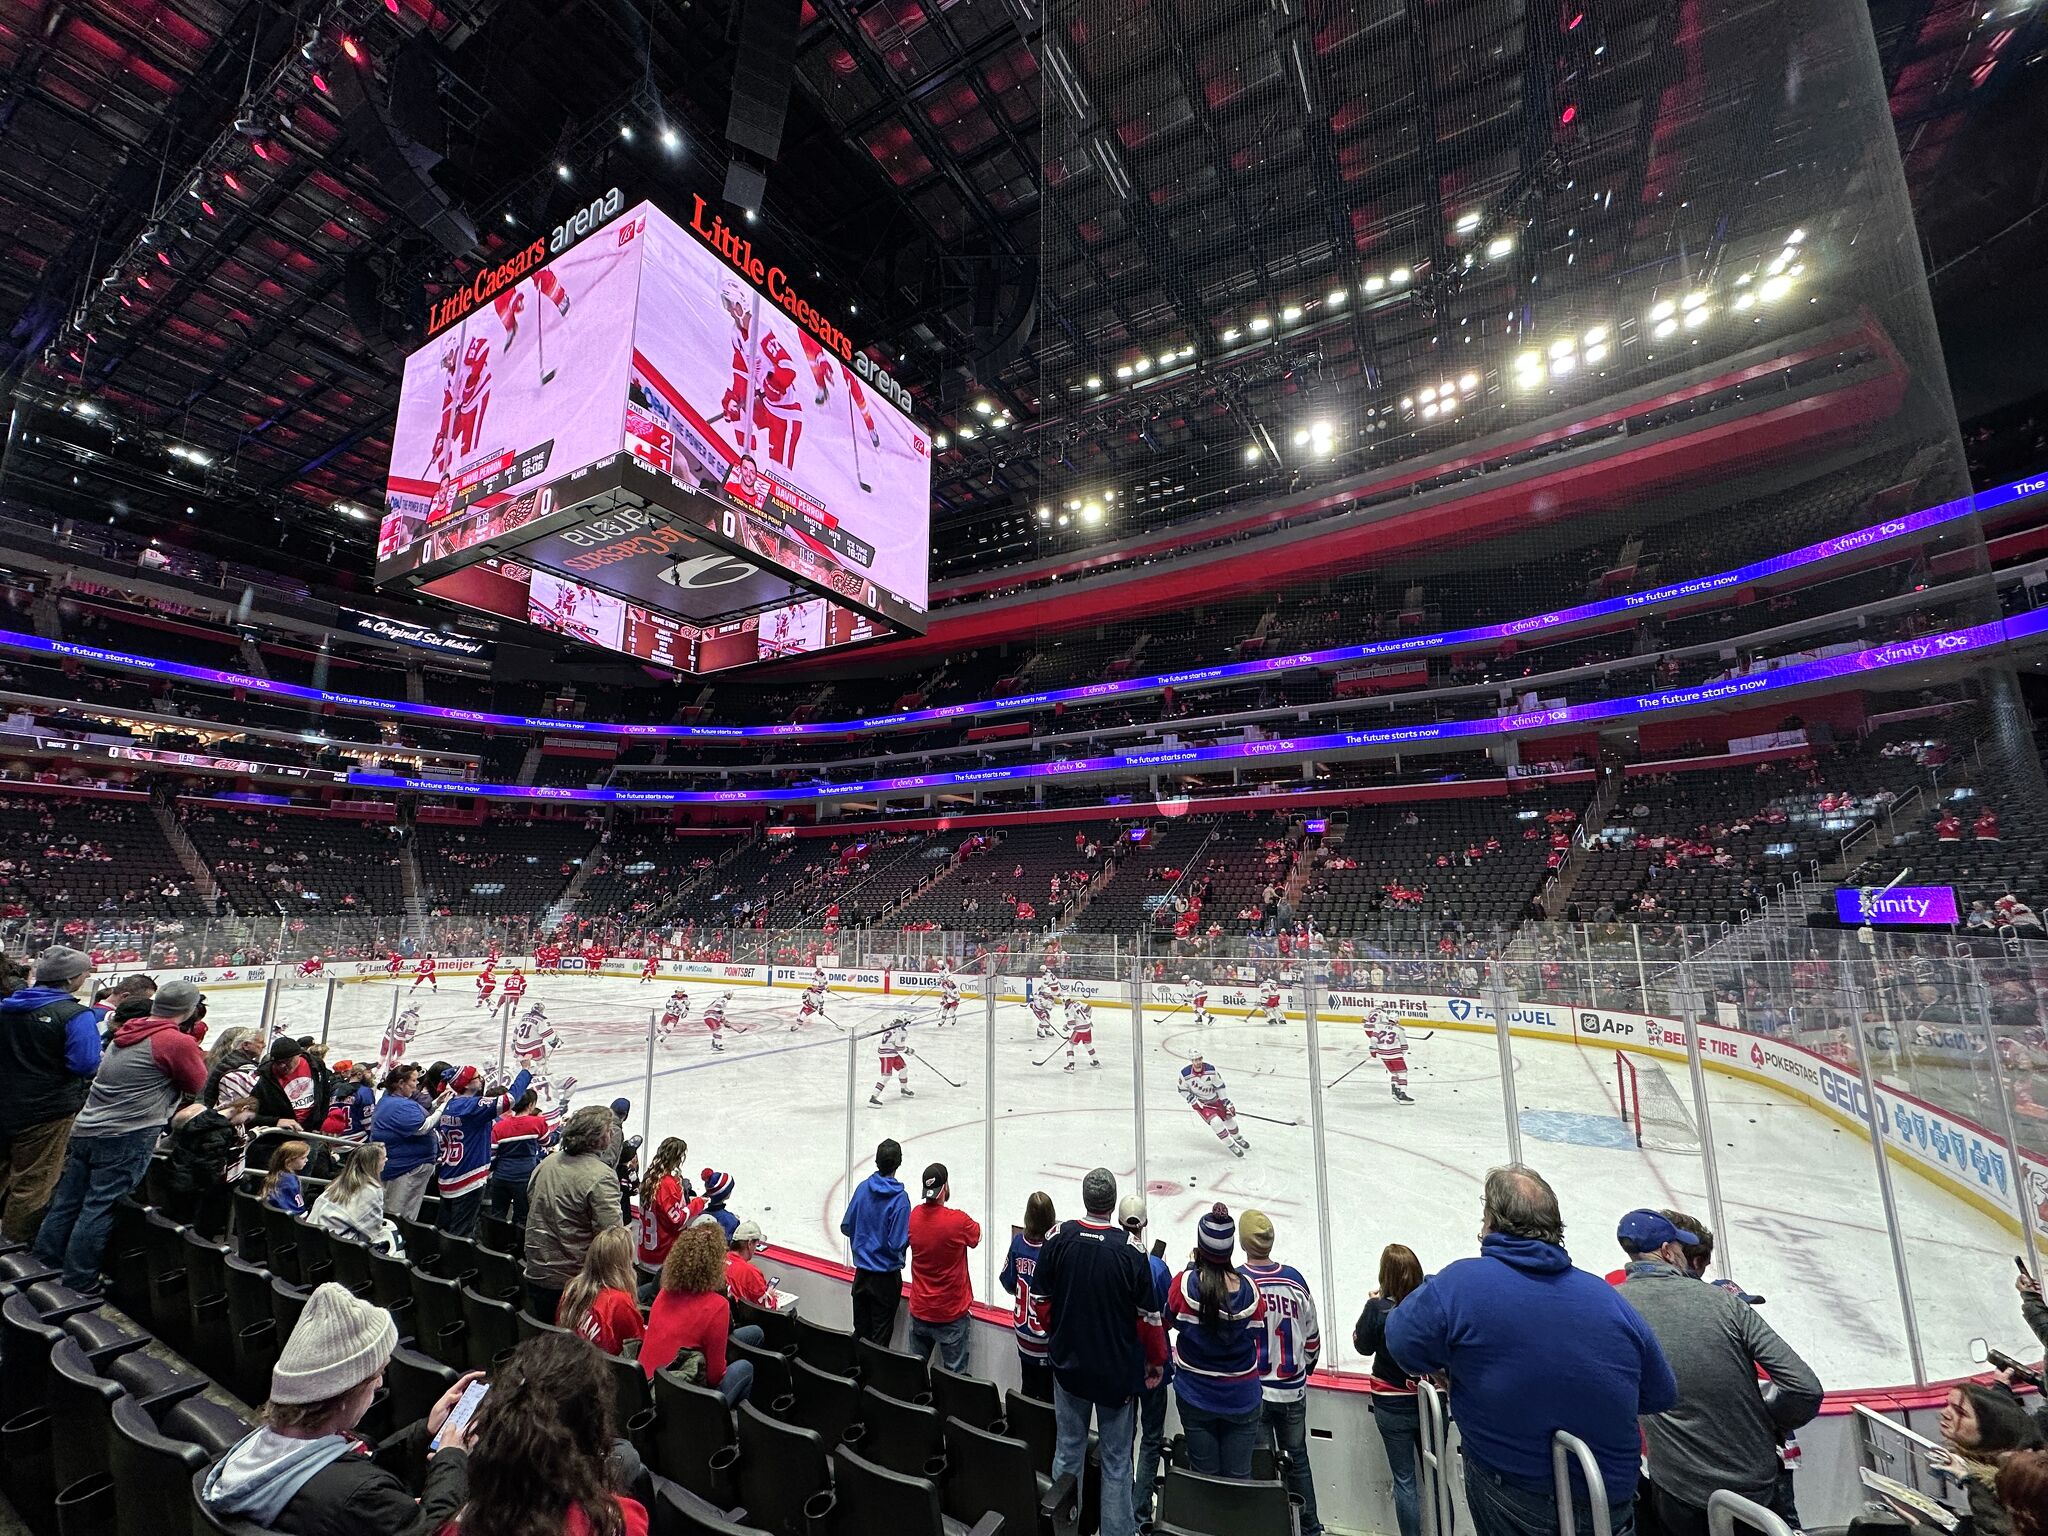 There's only one Hockeytown USA, and it's not in Michigan